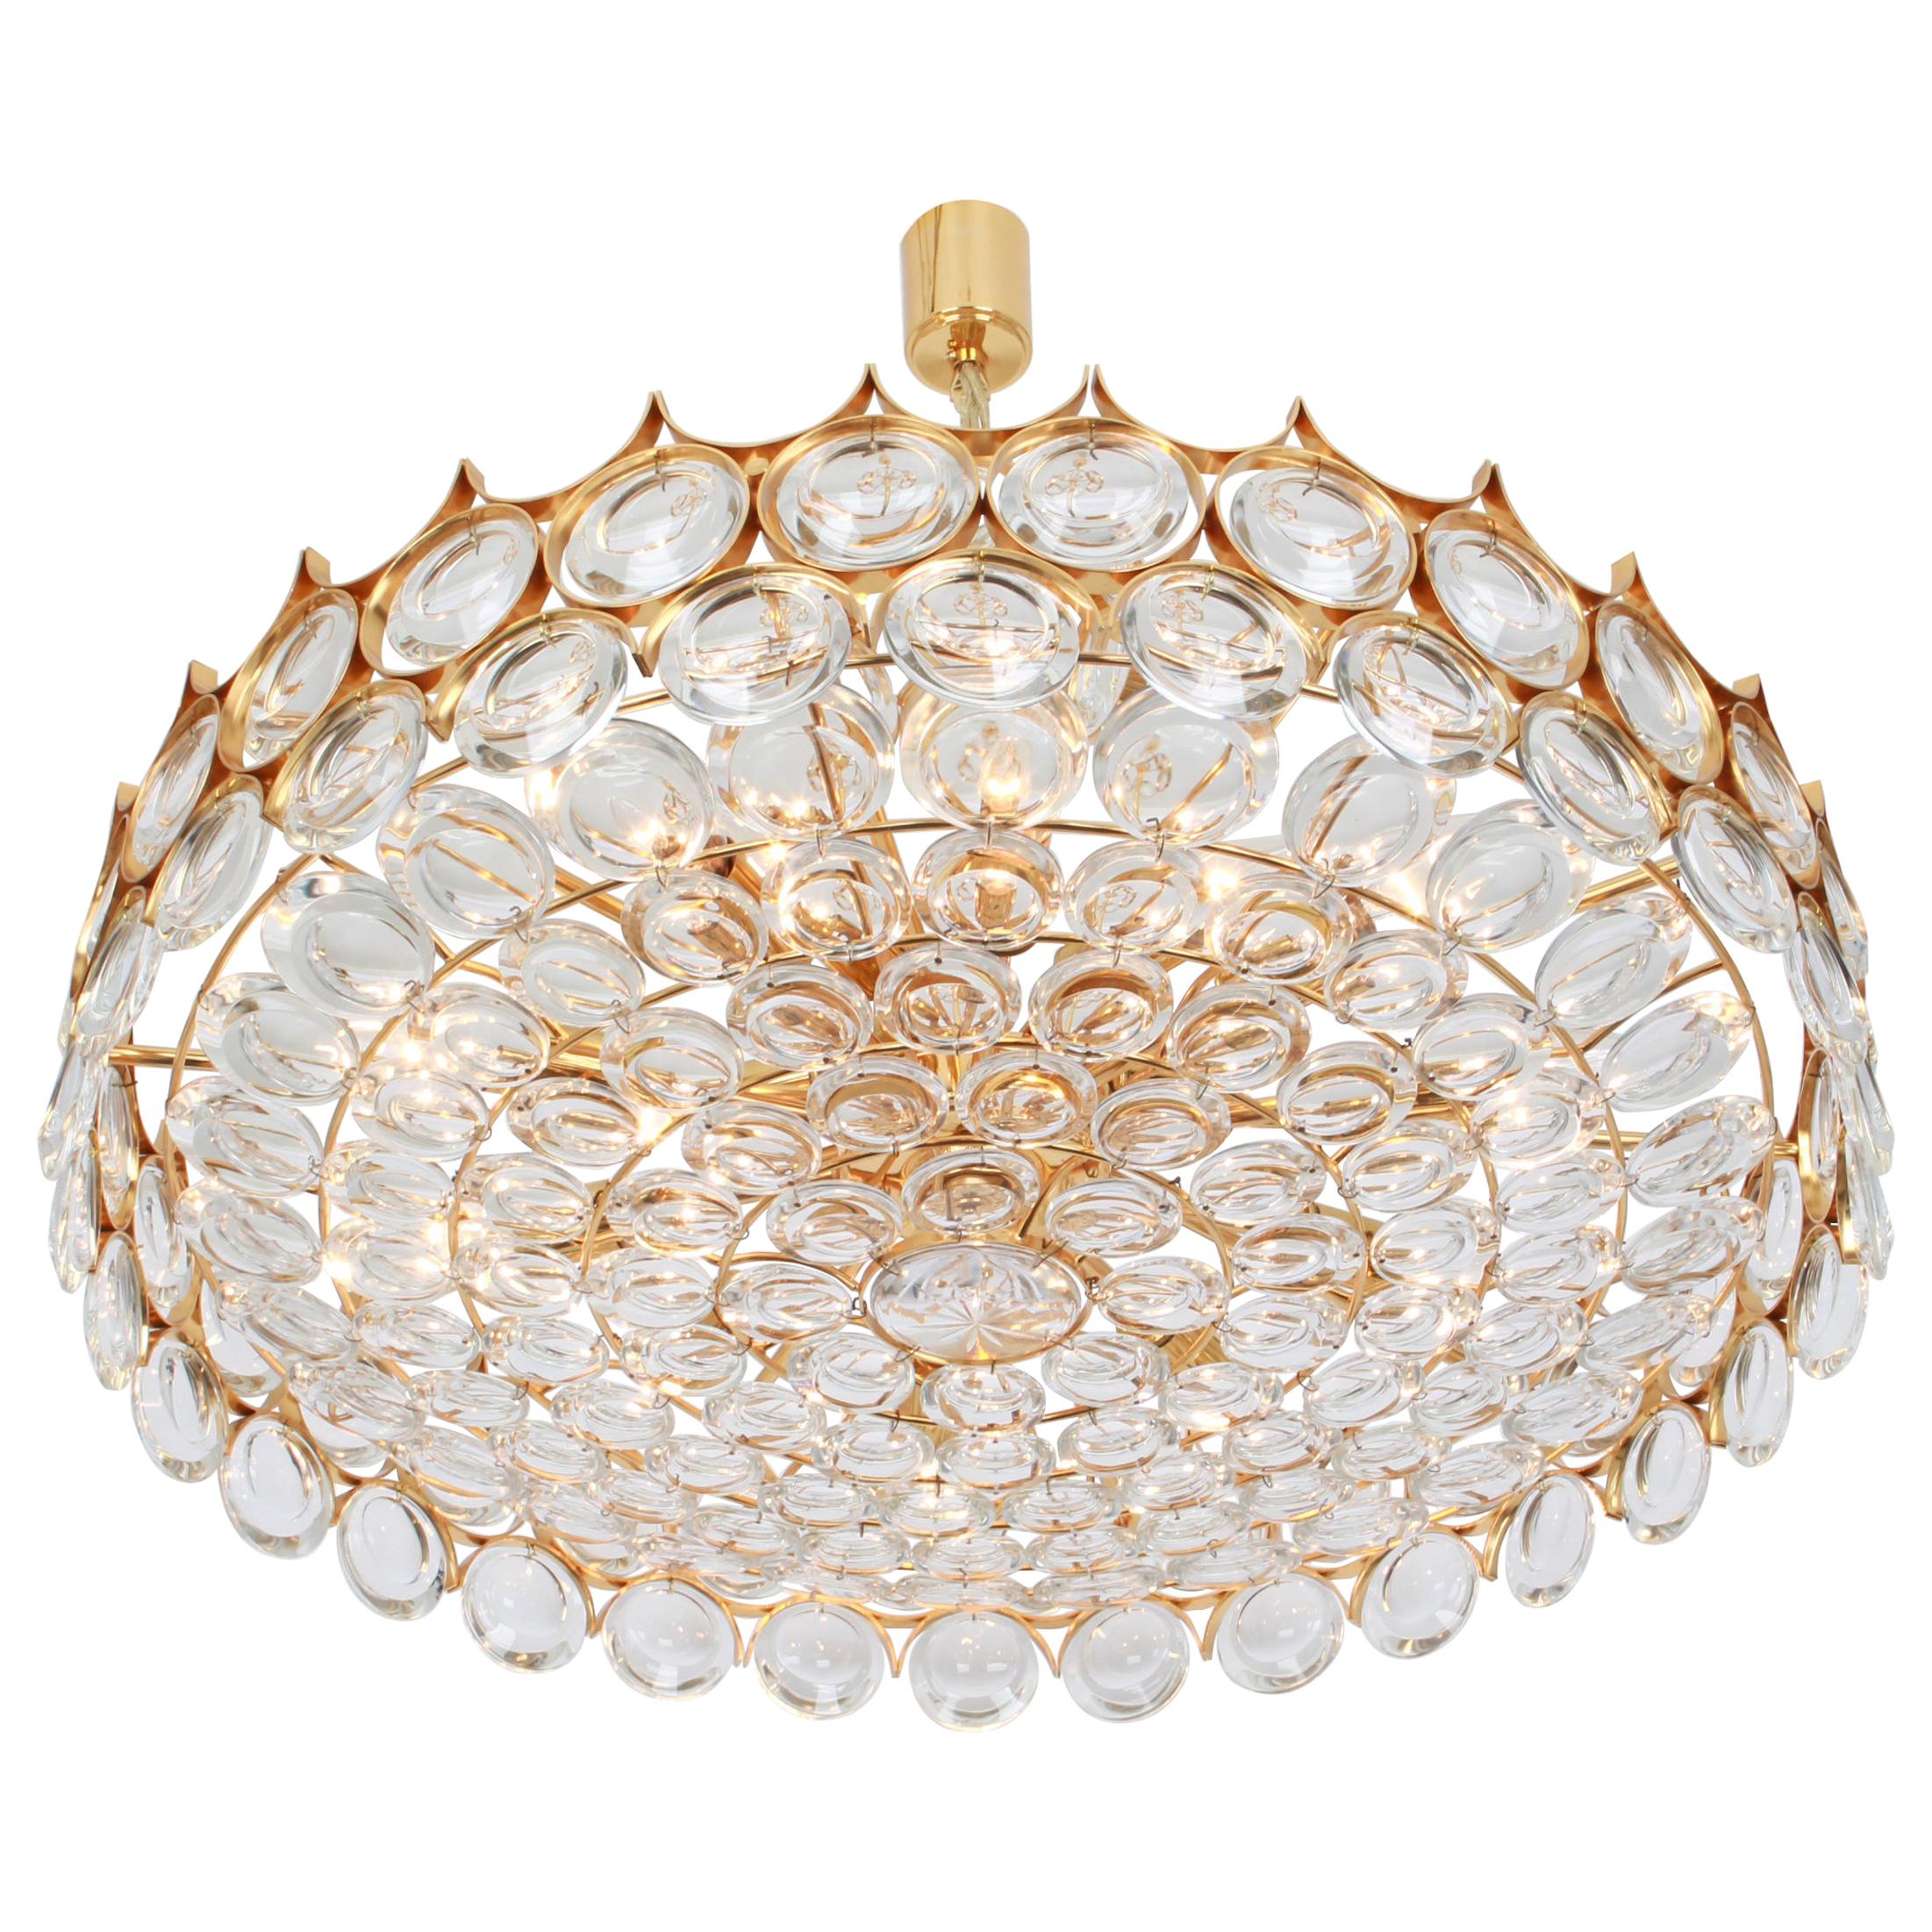 Huge Gilt Brass and Crystal Chandelier, Sciolari Design by Palwa, Germany, 1970s